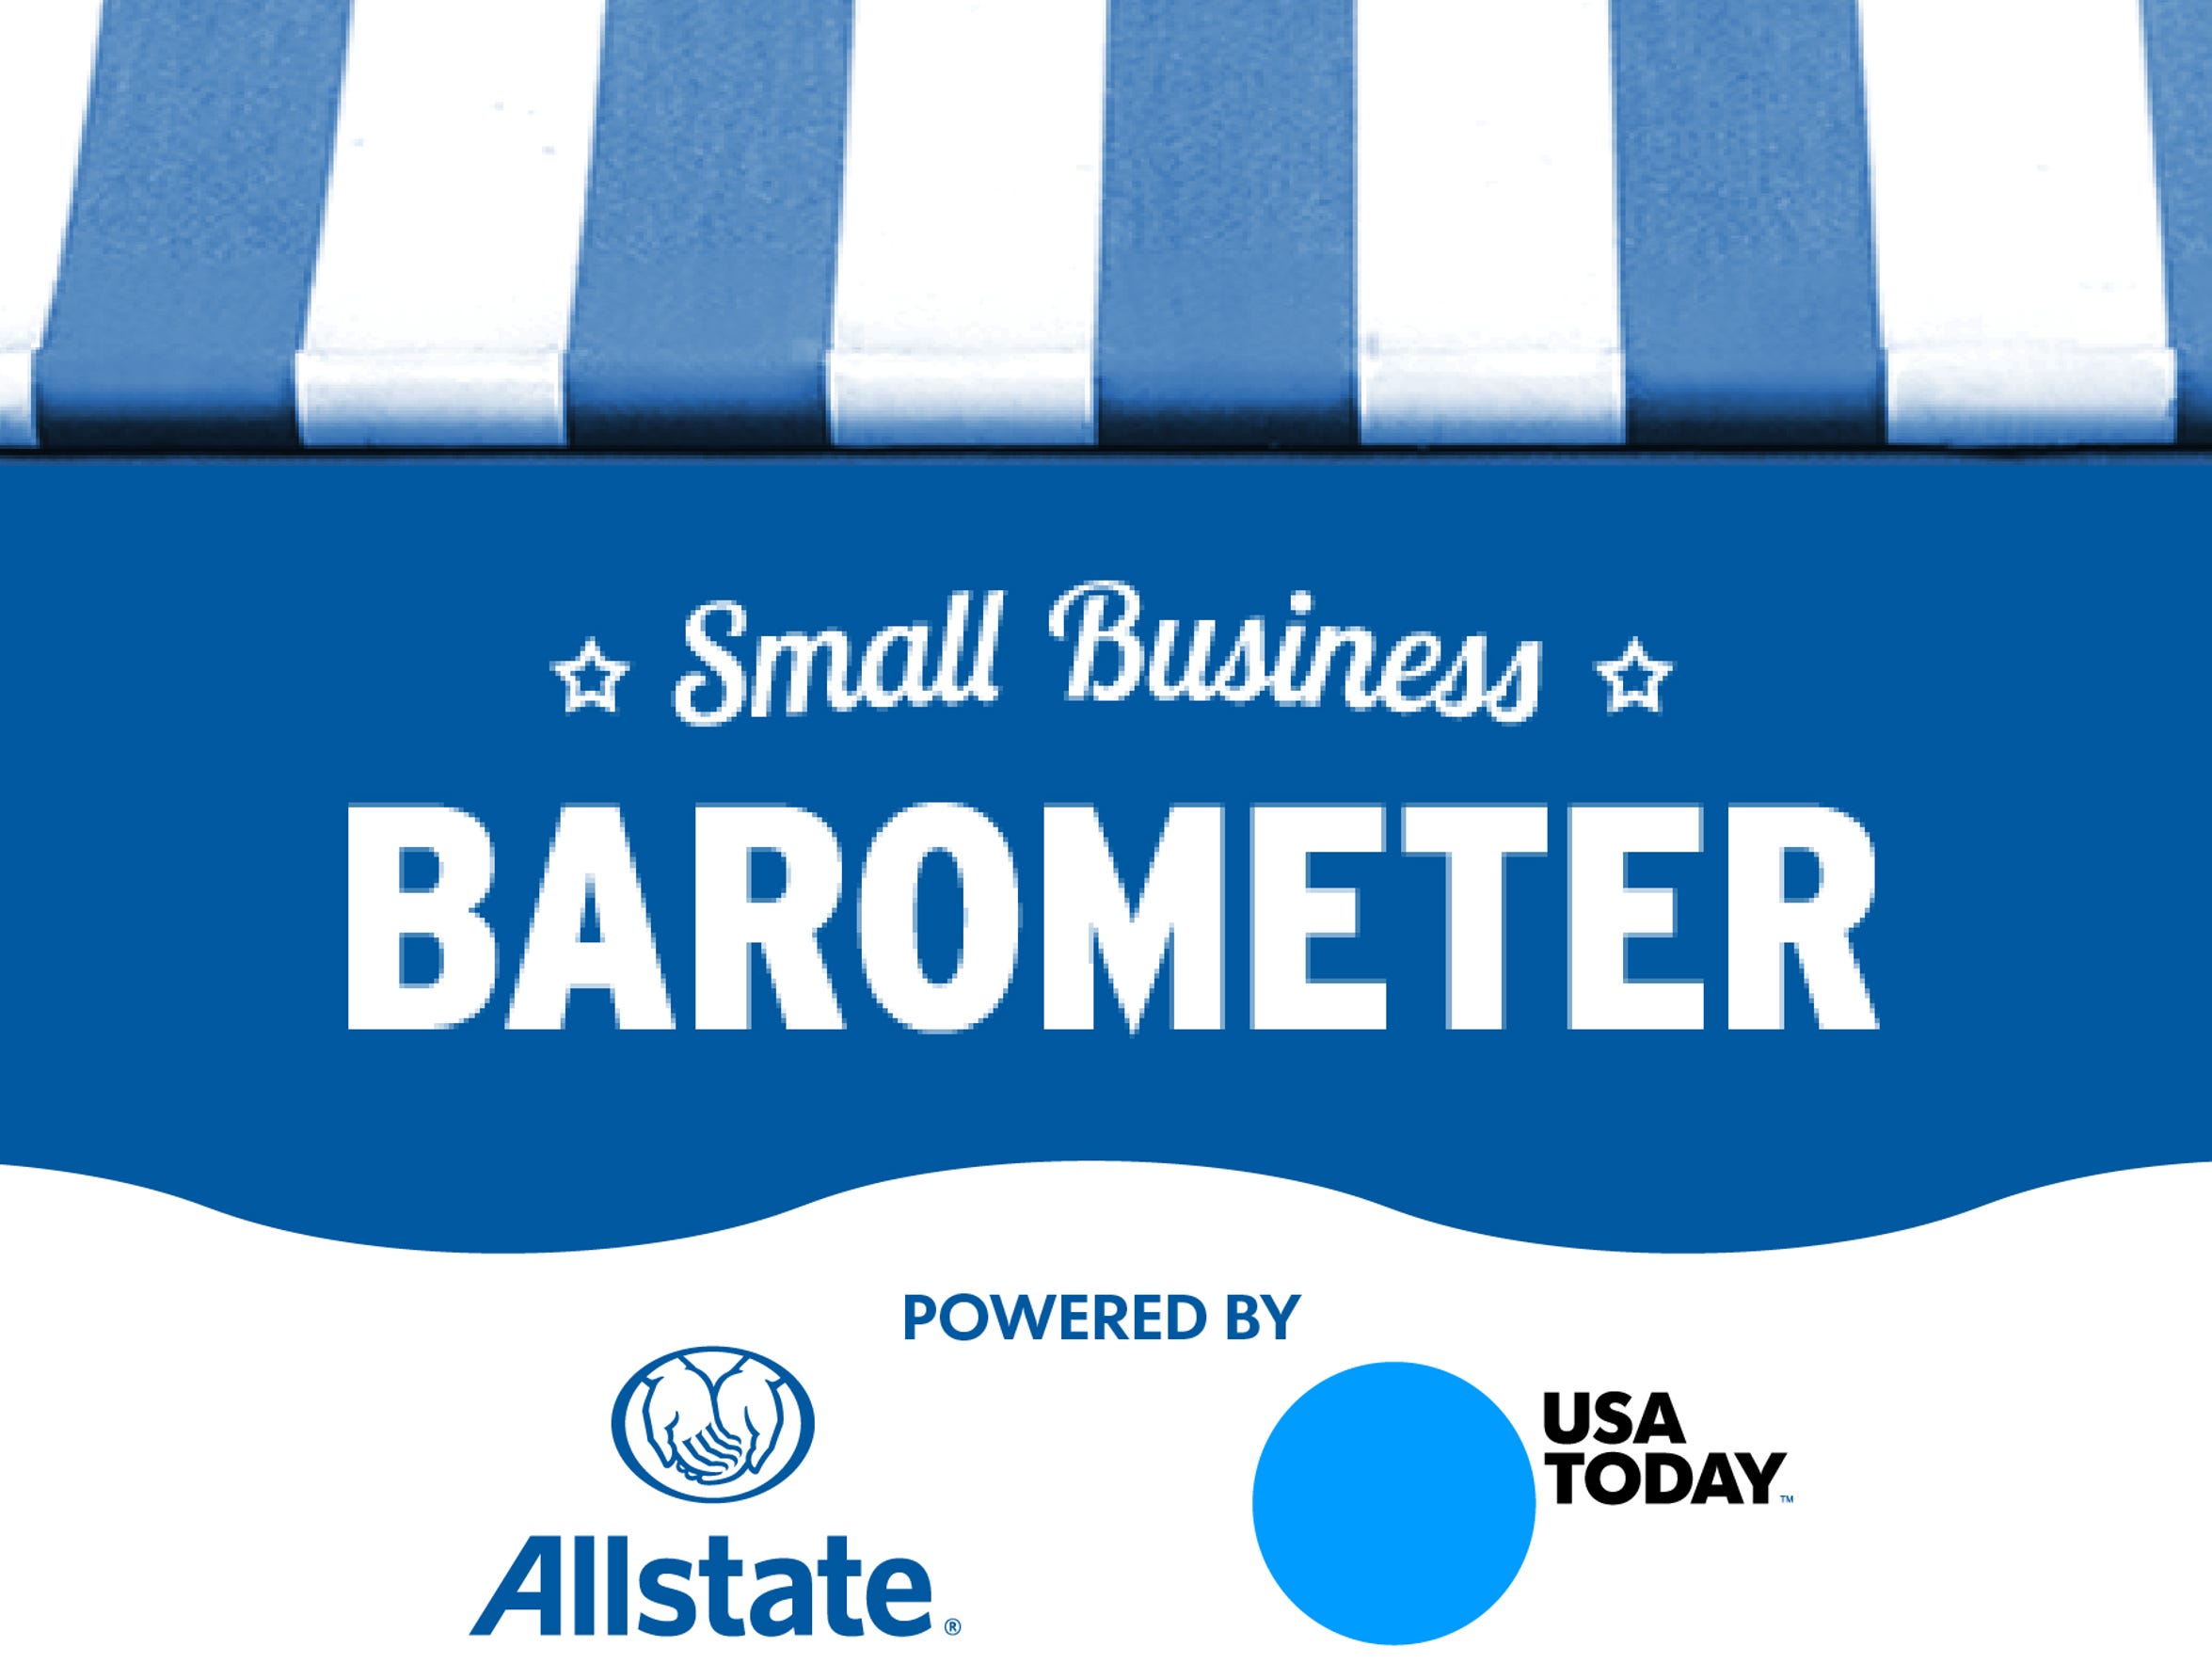 The Allstate/USA TODAY Small Business Barometer